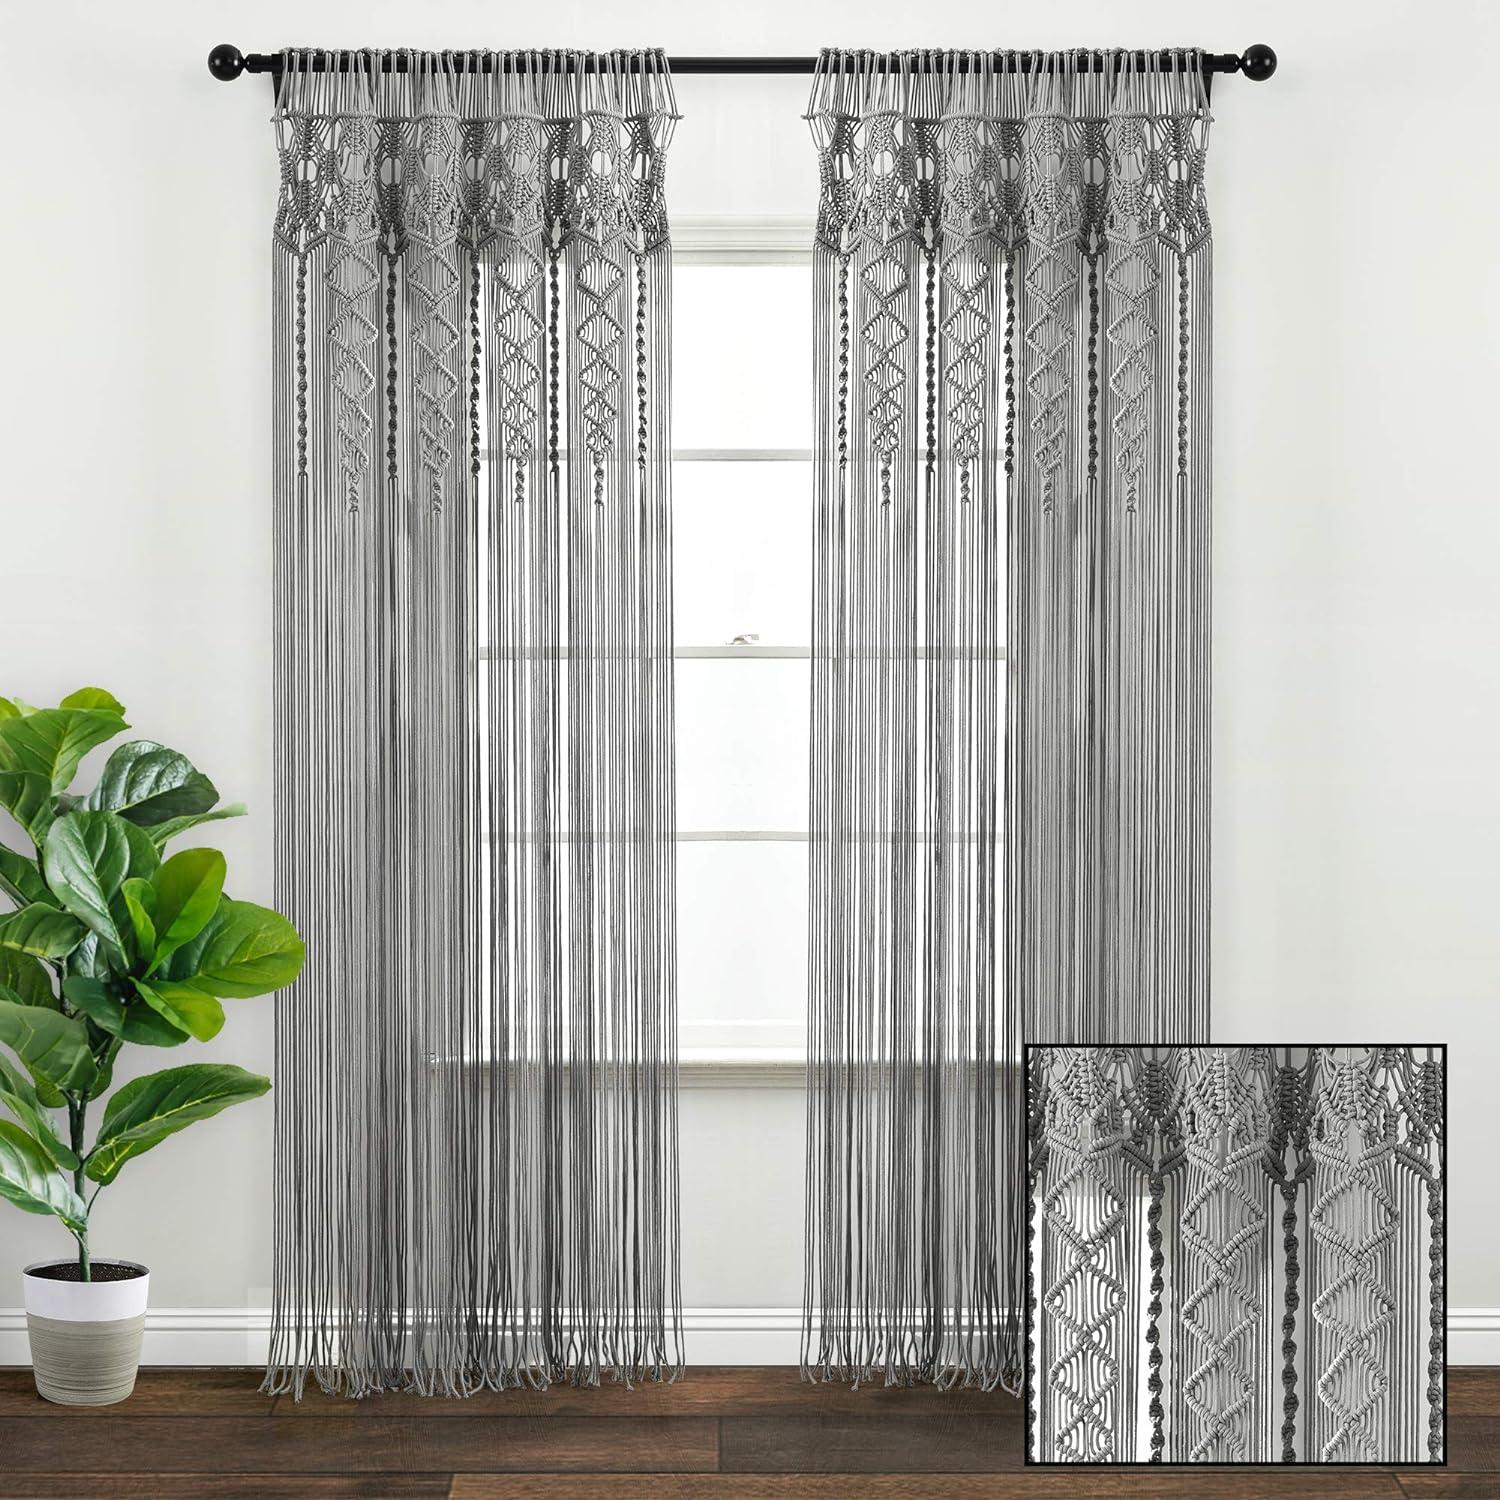 Hand-Knotted Bohemian Gray Cotton Macrame Curtain Panel - 84"x40"